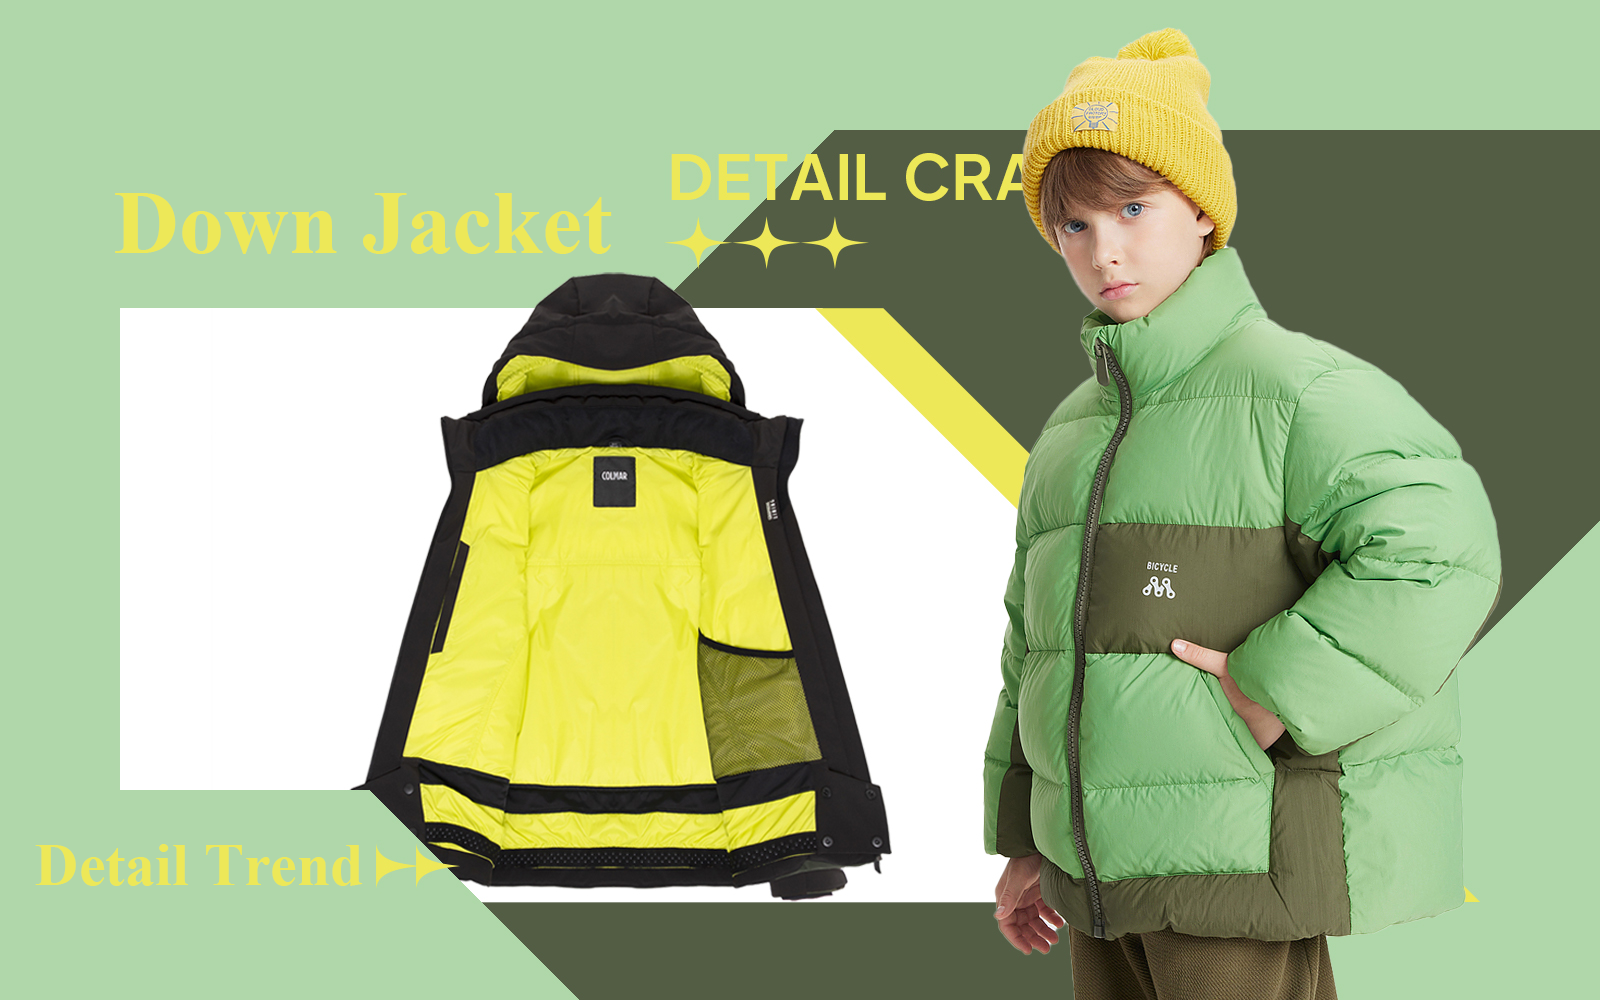 The Detail & Craft Trend for Kids' Down Jacket